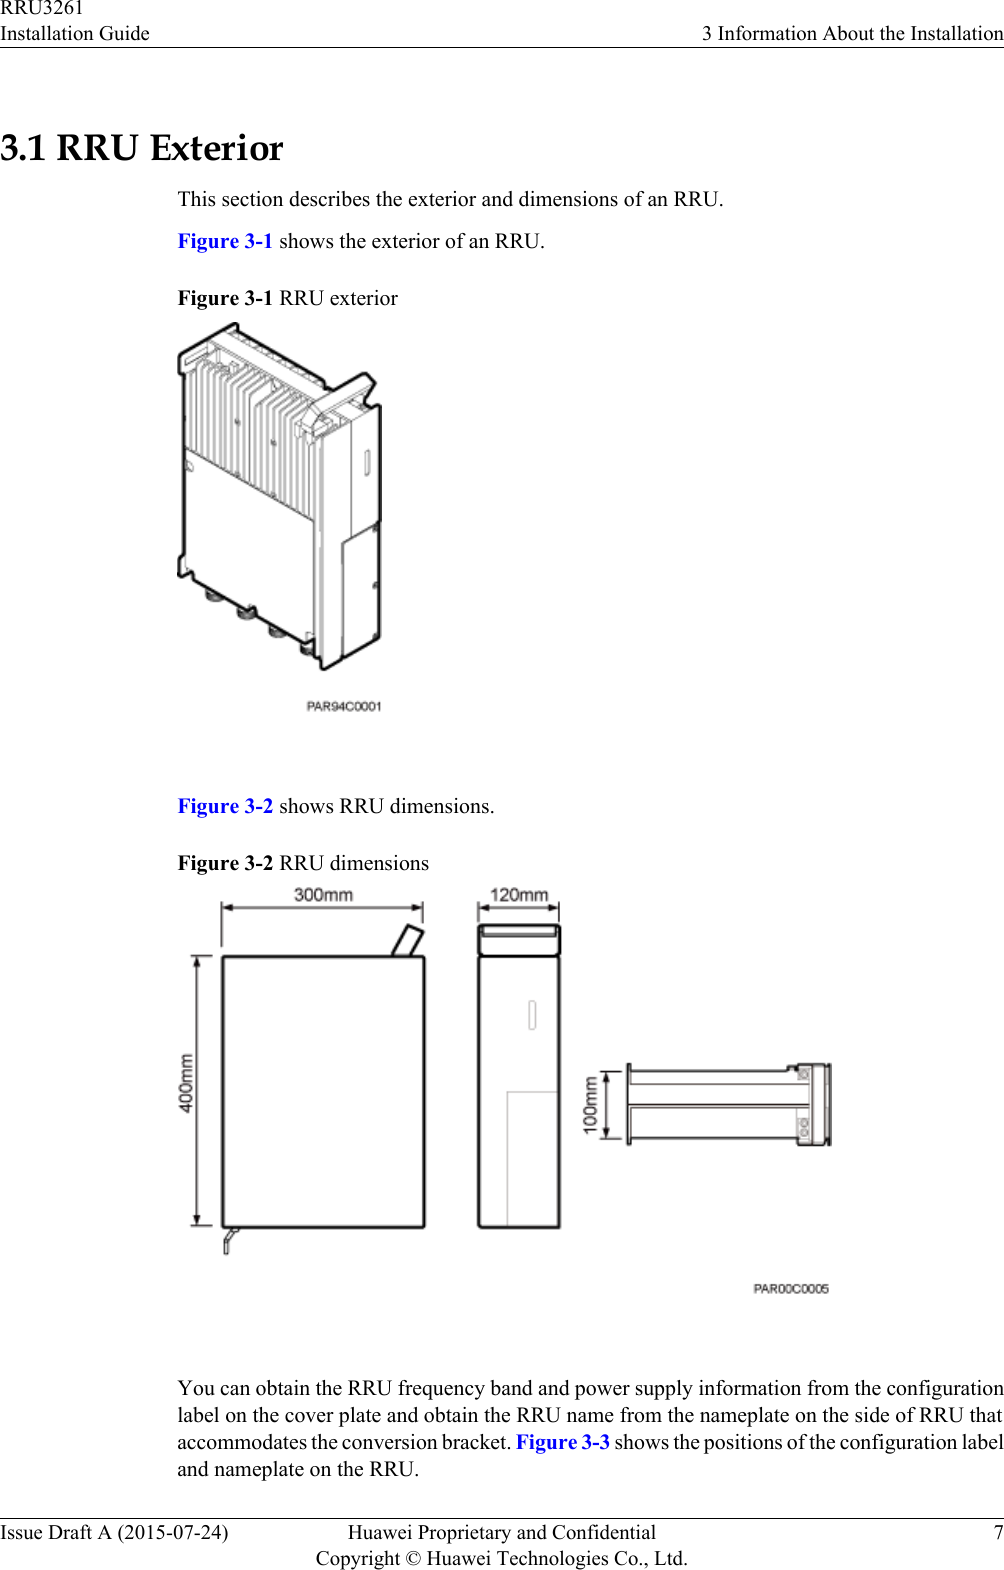 3.1 RRU ExteriorThis section describes the exterior and dimensions of an RRU.Figure 3-1 shows the exterior of an RRU.Figure 3-1 RRU exterior Figure 3-2 shows RRU dimensions.Figure 3-2 RRU dimensions You can obtain the RRU frequency band and power supply information from the configurationlabel on the cover plate and obtain the RRU name from the nameplate on the side of RRU thataccommodates the conversion bracket. Figure 3-3 shows the positions of the configuration labeland nameplate on the RRU.RRU3261Installation Guide 3 Information About the InstallationIssue Draft A (2015-07-24) Huawei Proprietary and ConfidentialCopyright © Huawei Technologies Co., Ltd.7